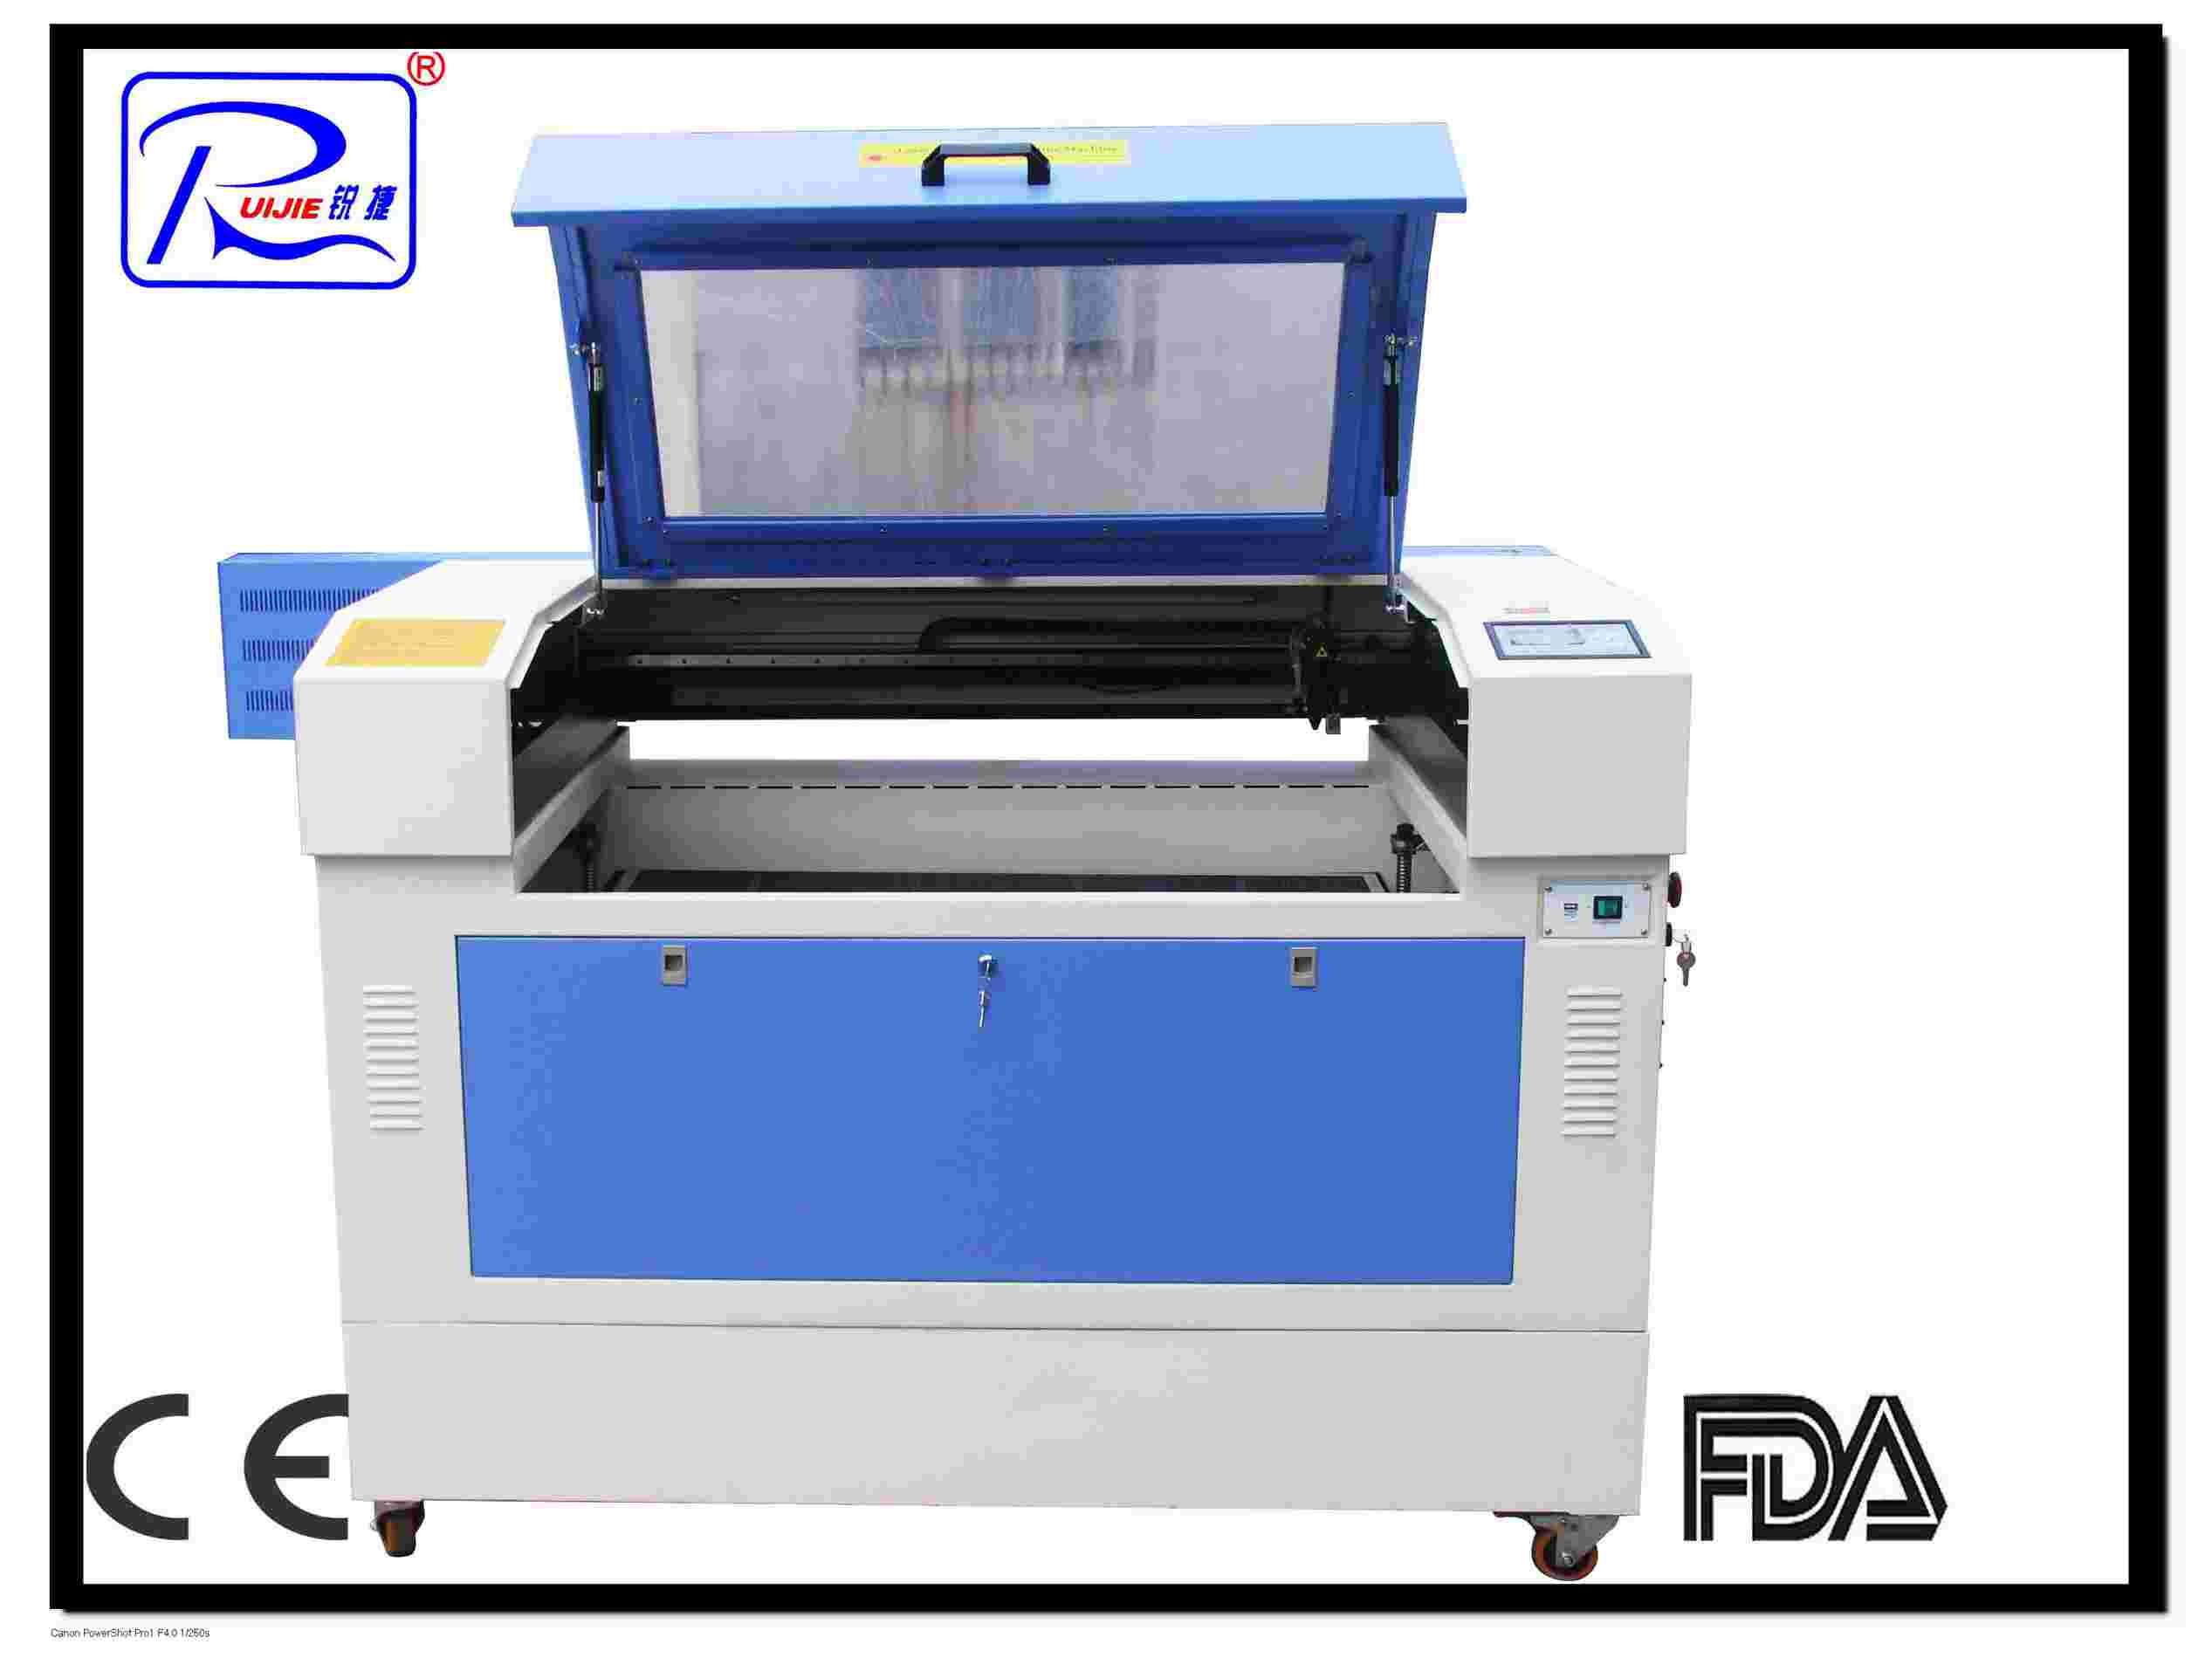 cnc laser engraving machine RJ6040, RJ1060, RJ1280 (With Up-down Working Table)